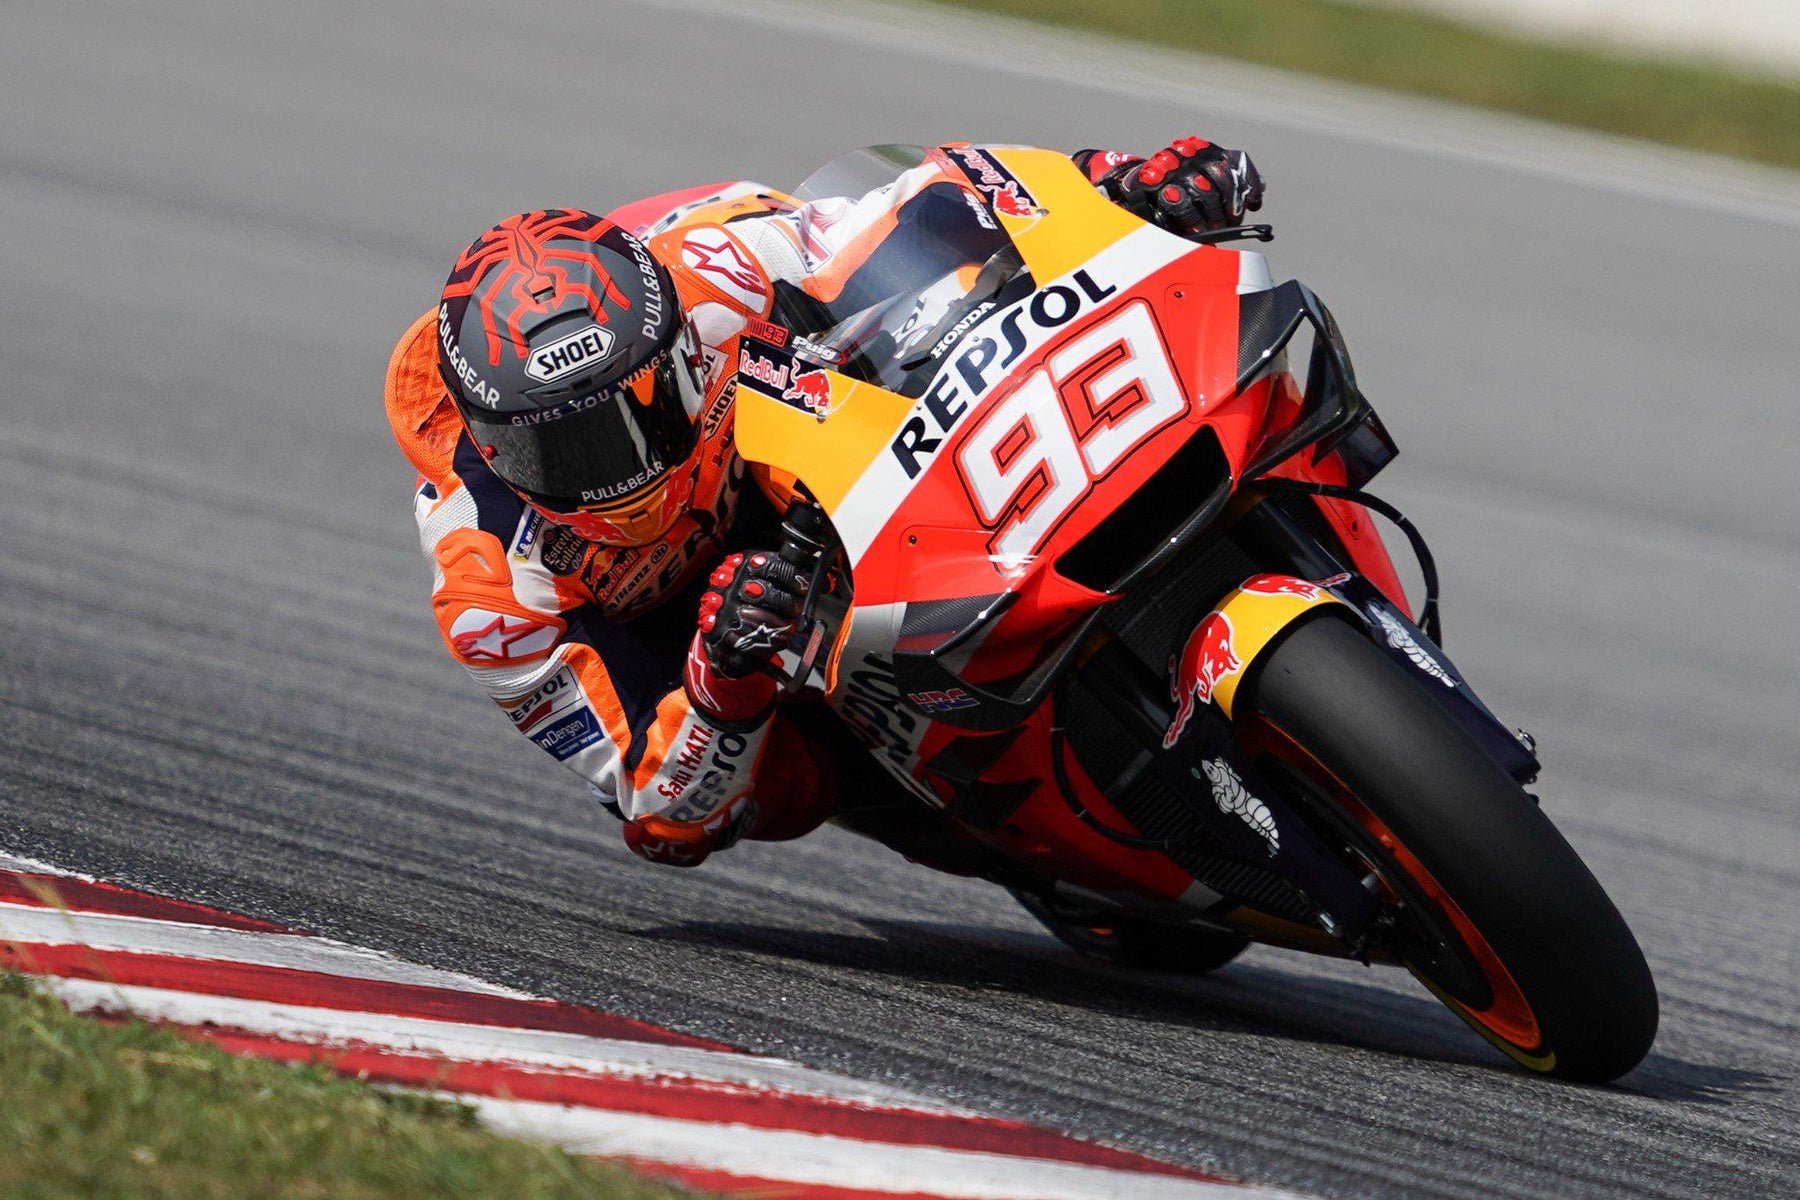 Marc Marquez wins his 8th World Championship in Thailand